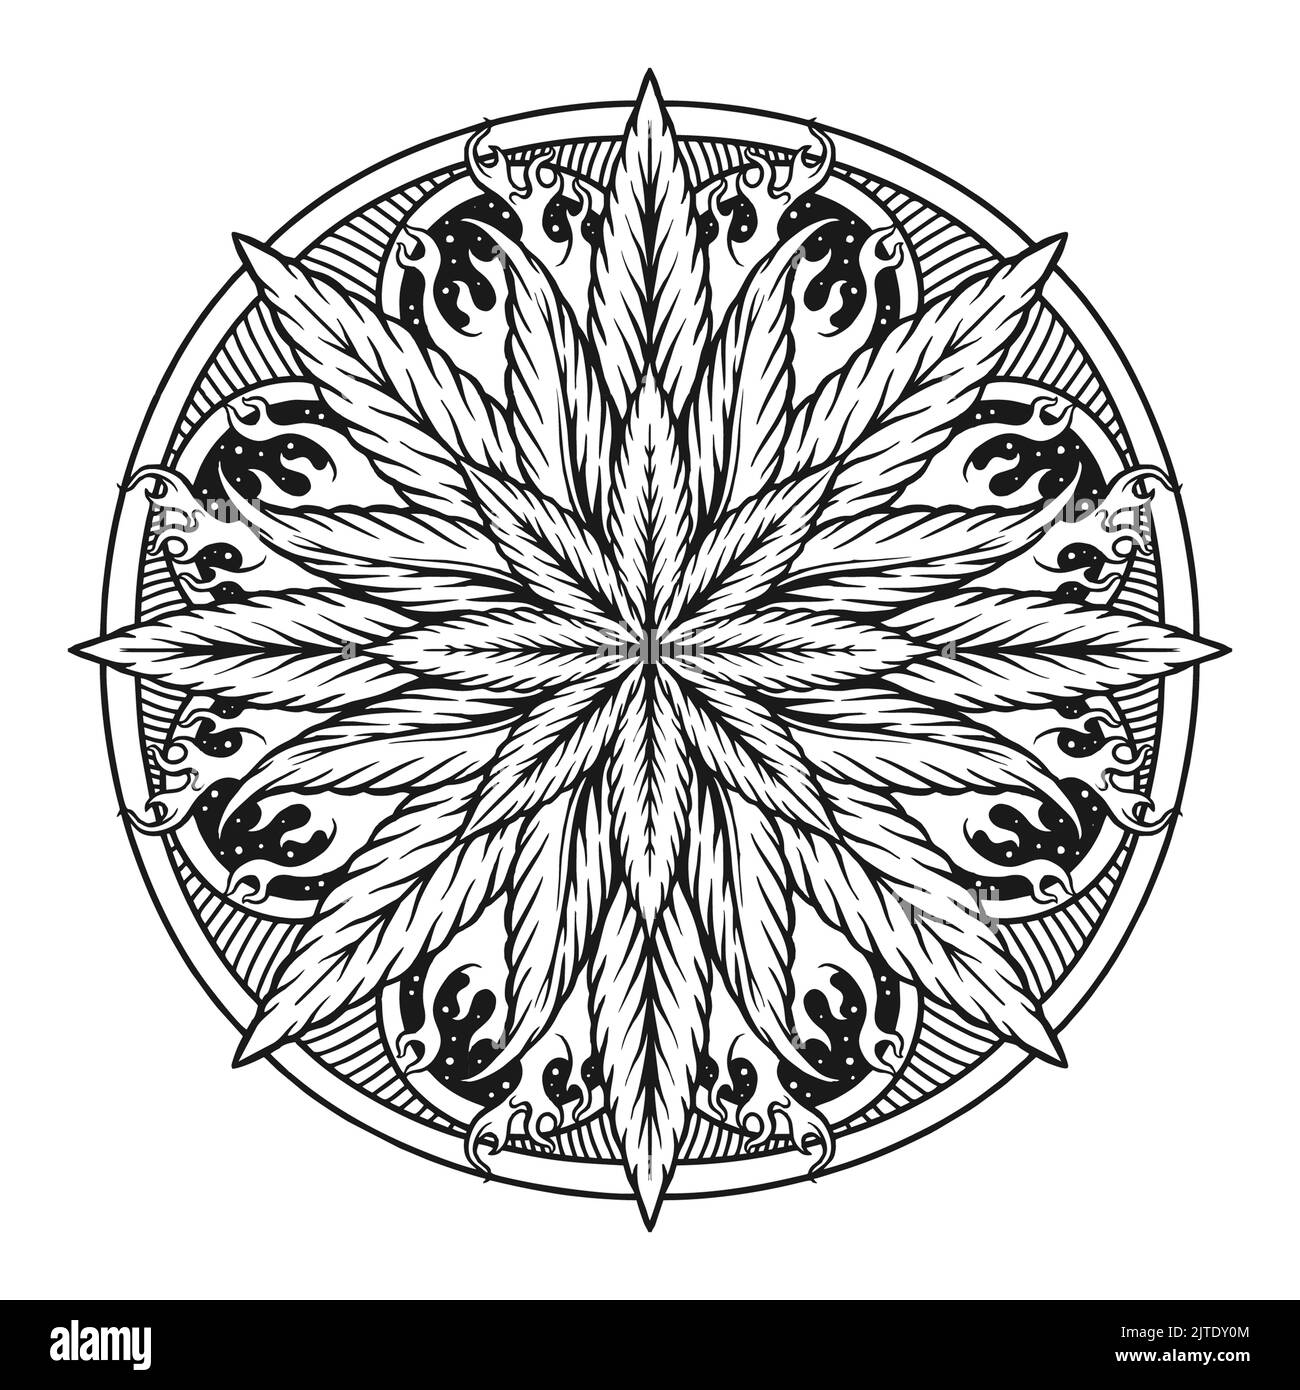 Cannabis Leaf Mandala Black and White Vector illustrations for your work Logo, mascot merchandise t-shirt, stickers and Label designs, poster, greetin Stock Photo